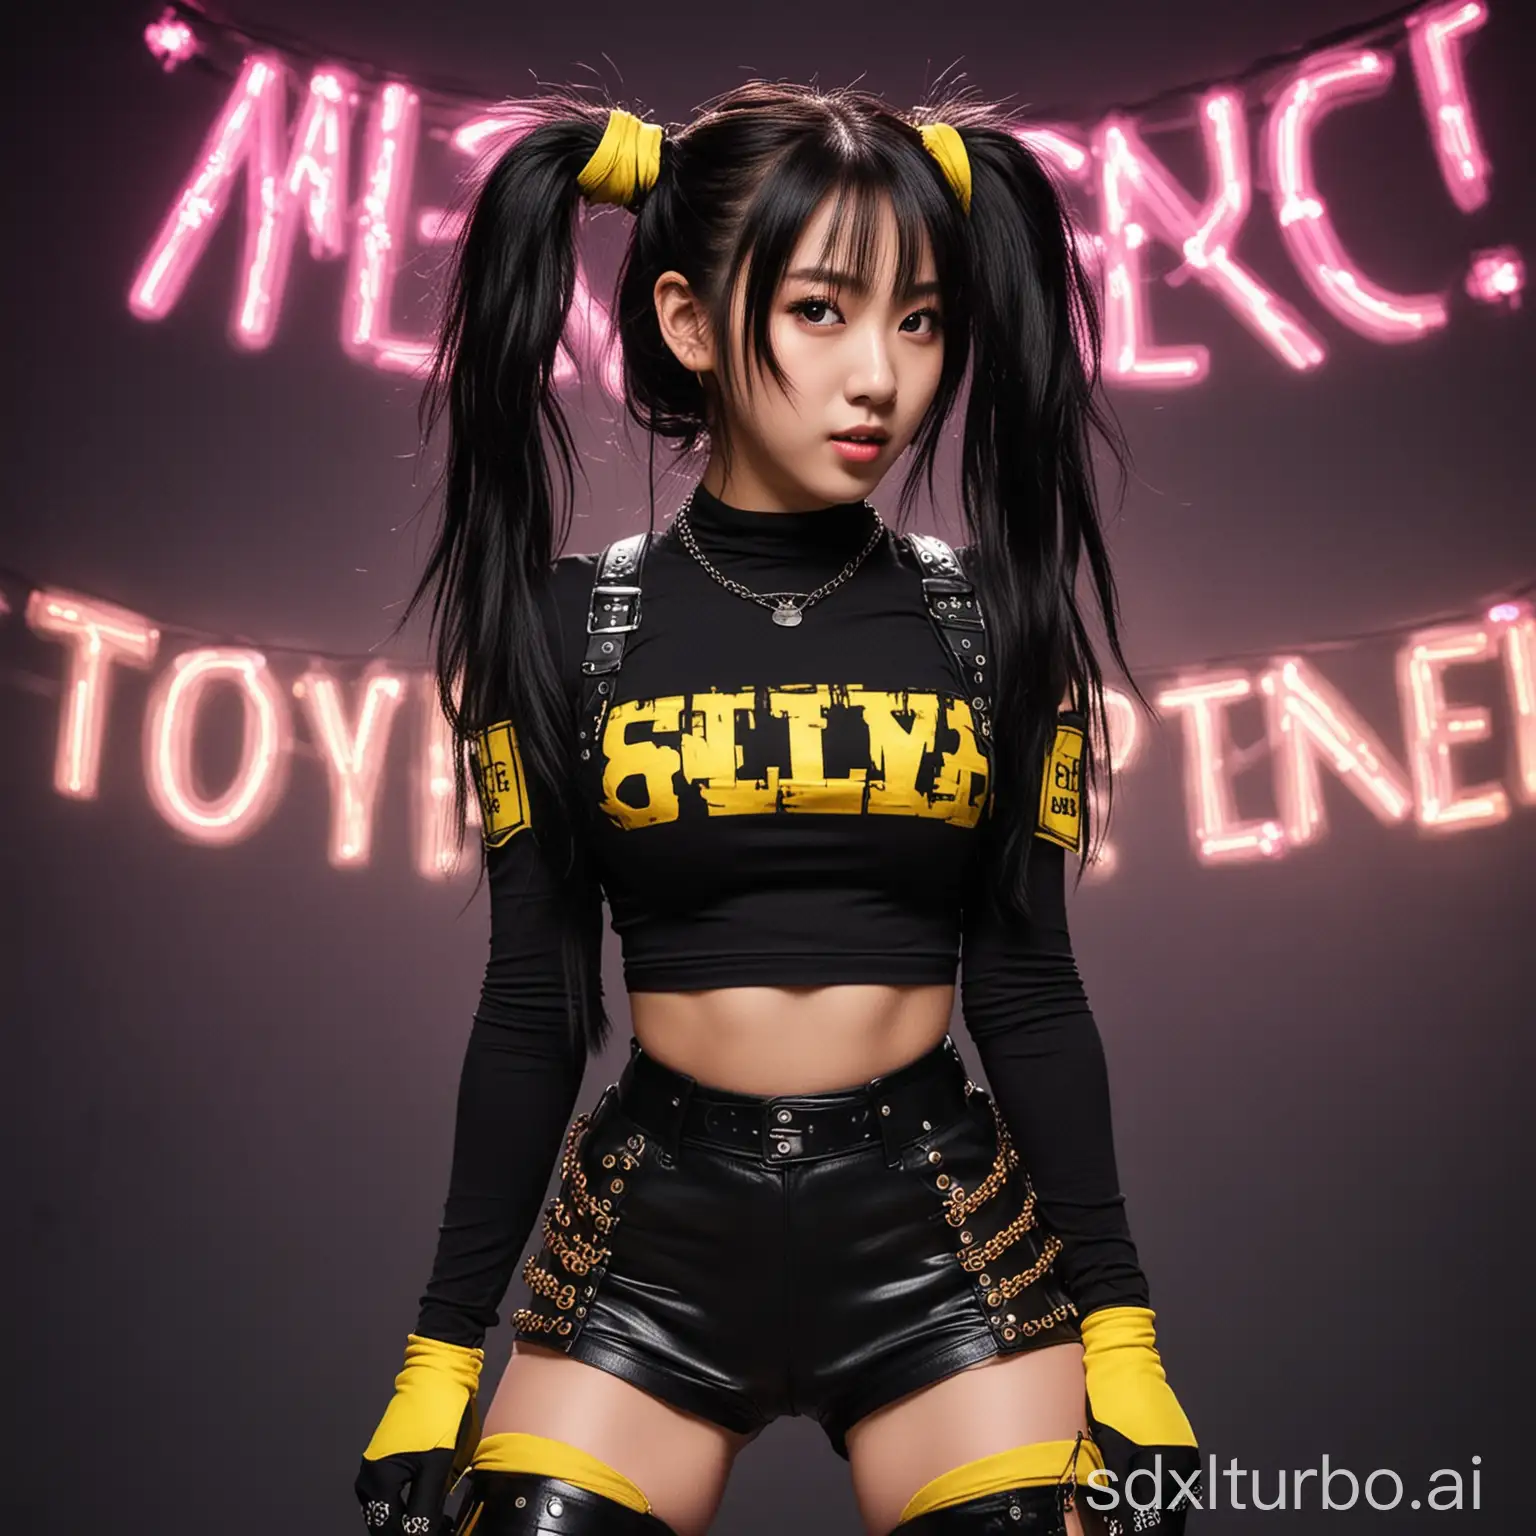 (masterpiece,best quality,beautiful detailed face), from angle, 1 beautiful girl/Kpop girl,Black hair(pigtails hairstyle),Mouth mask, Black Crop Top,Black shorts,gloves,belts,Neck collar, On stage, colorful lights, spark,  dark background, realistic photography, detailed the inscription on the short black top glows in neon letters yellow “GPTunneL” --no pony, draw, old age, censored, furry